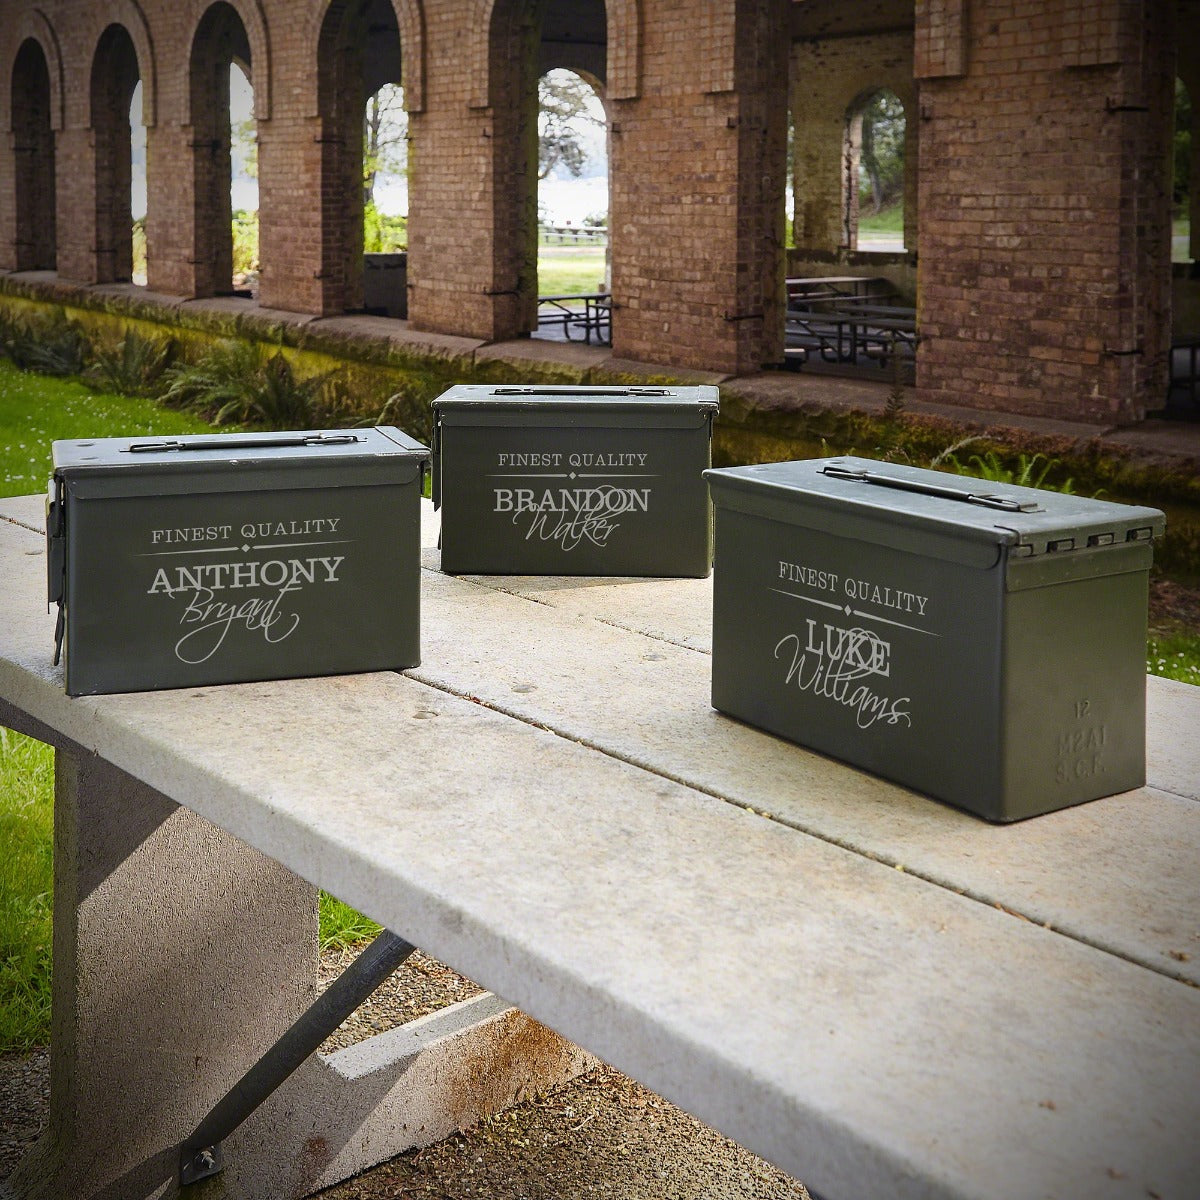 Personalized Groomsmen Gift Ideas 30 Cal Ammo Can - 5pc Gift Set